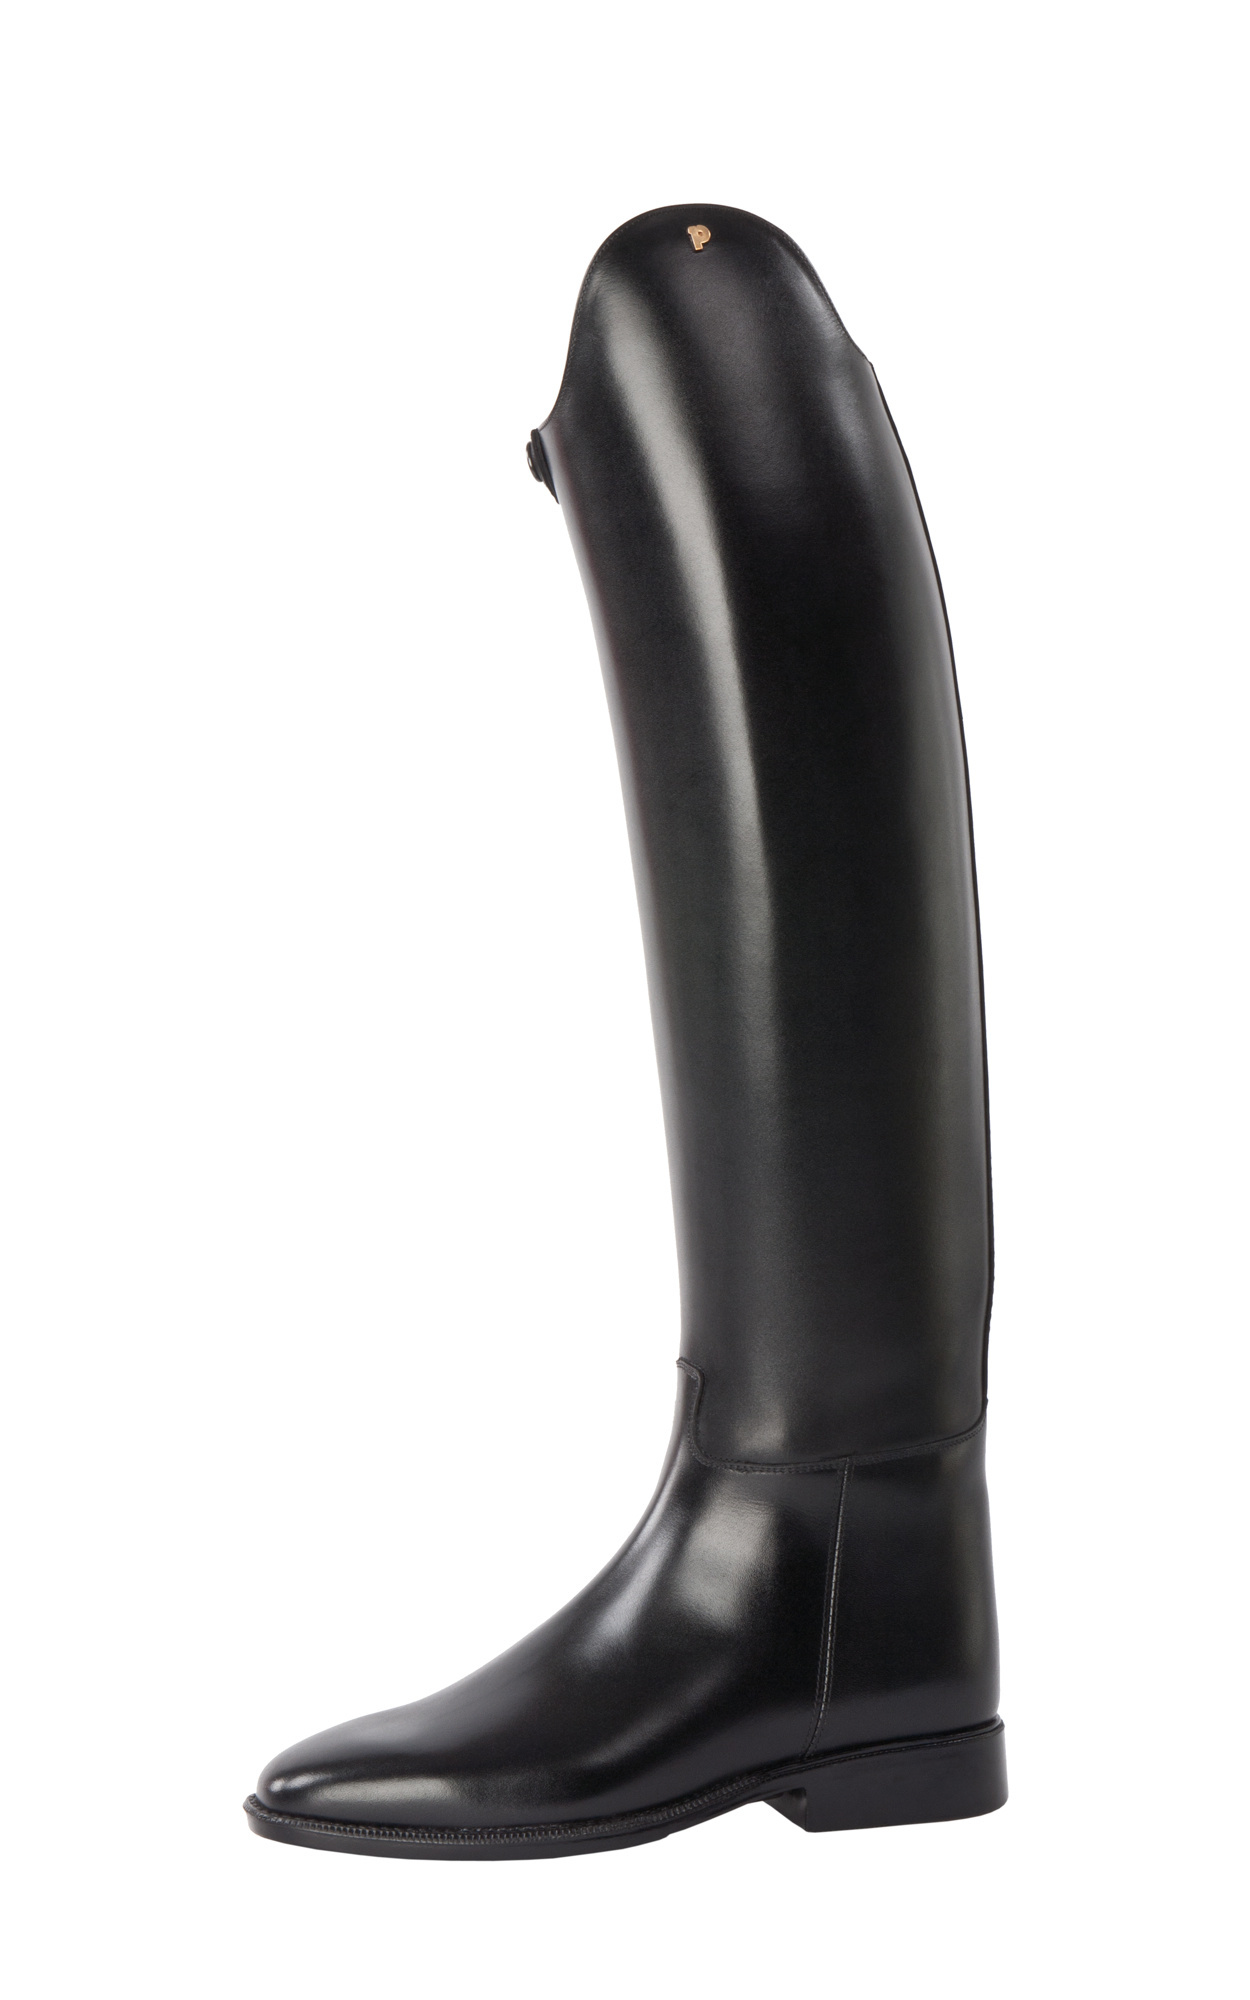 D626-6.5 Petrie Allure dressage with ankle support custom made 6.5 53 ...